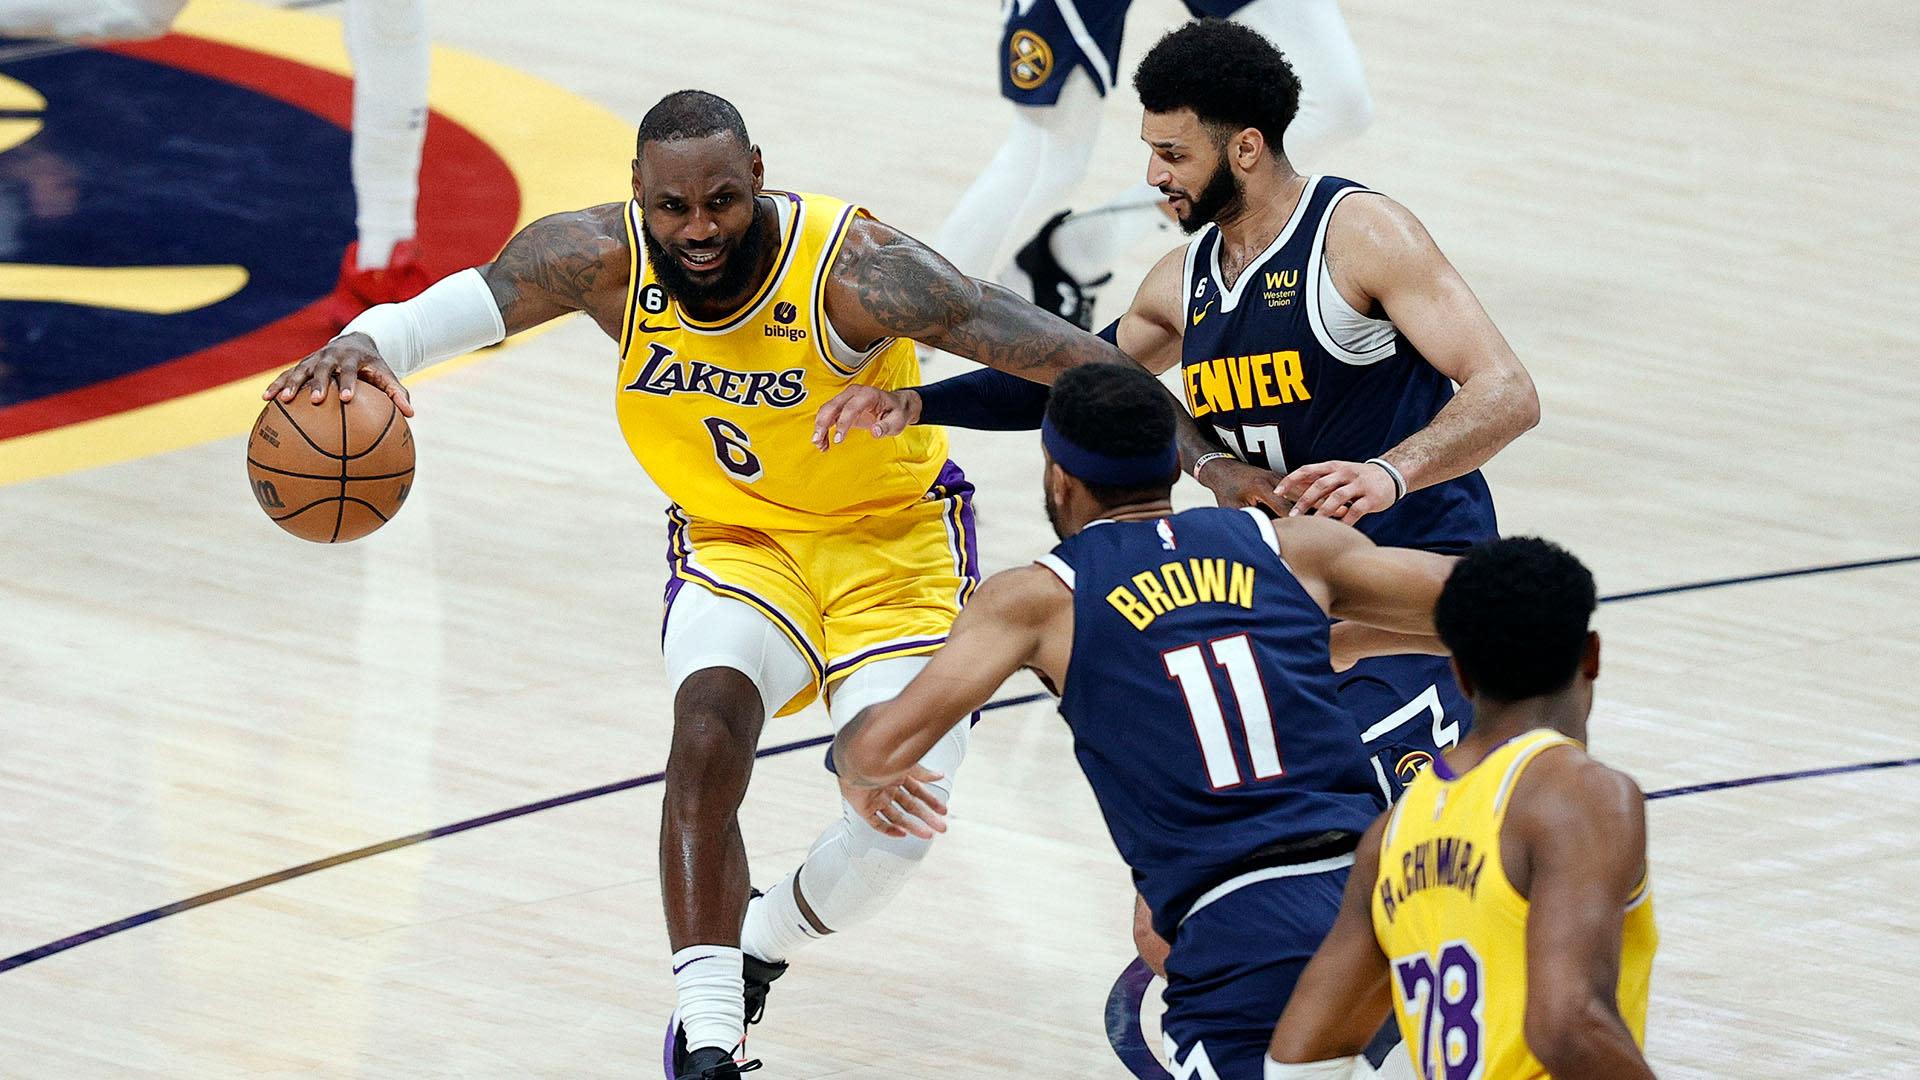 NBA playoffs Nuggets-Lakers Game 3 live updates, scores, lineups, injury report, how to watch, TV channel